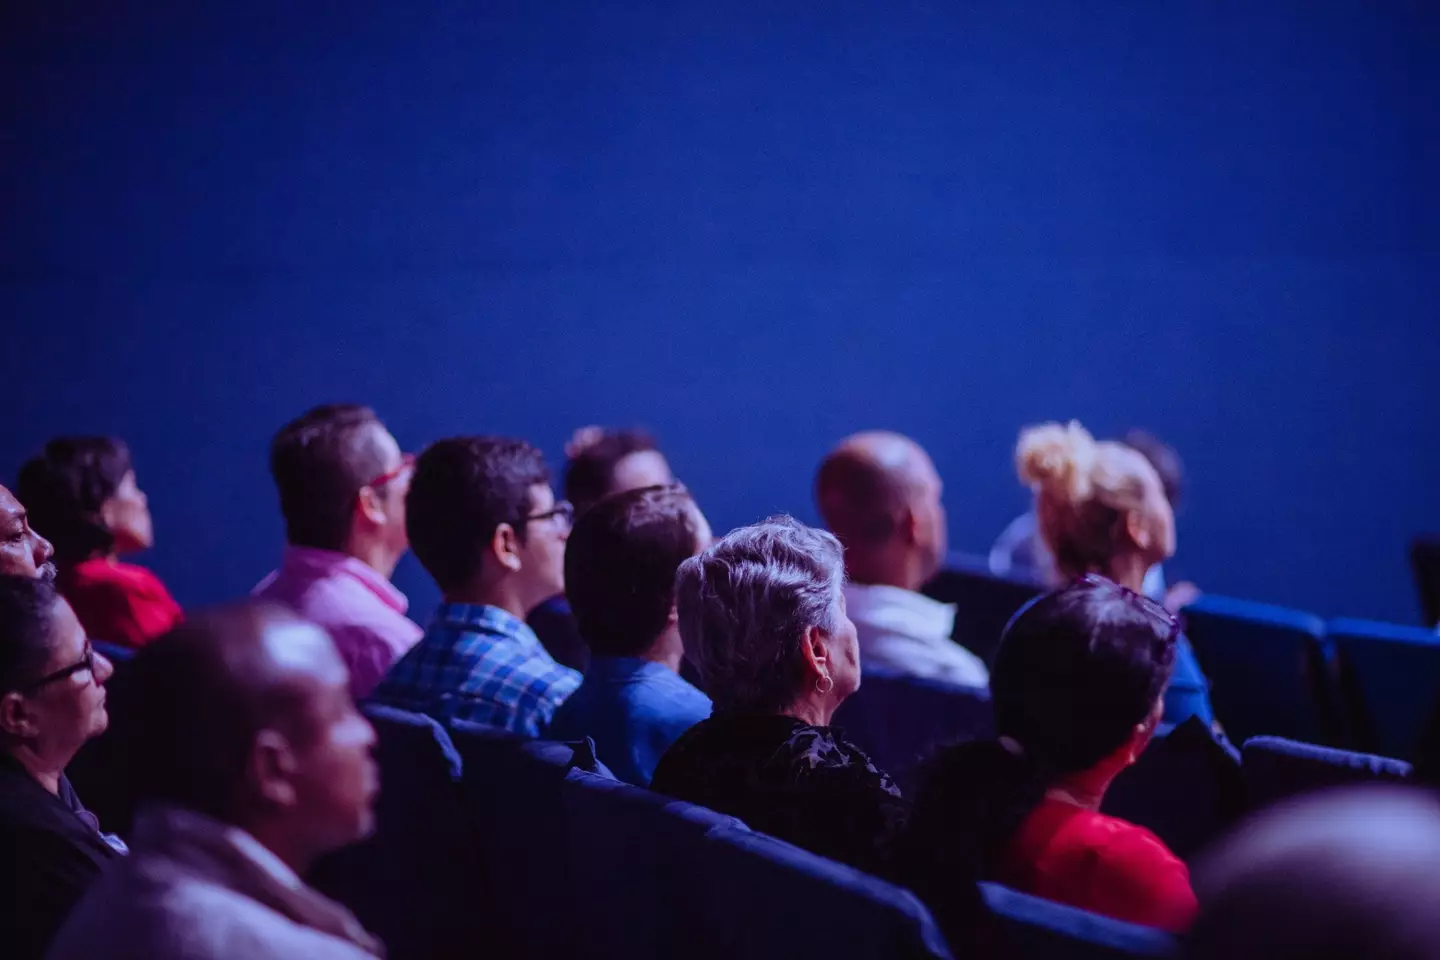 Would you agree to swap seats at the cinema if you'd pre-paid for a seat?